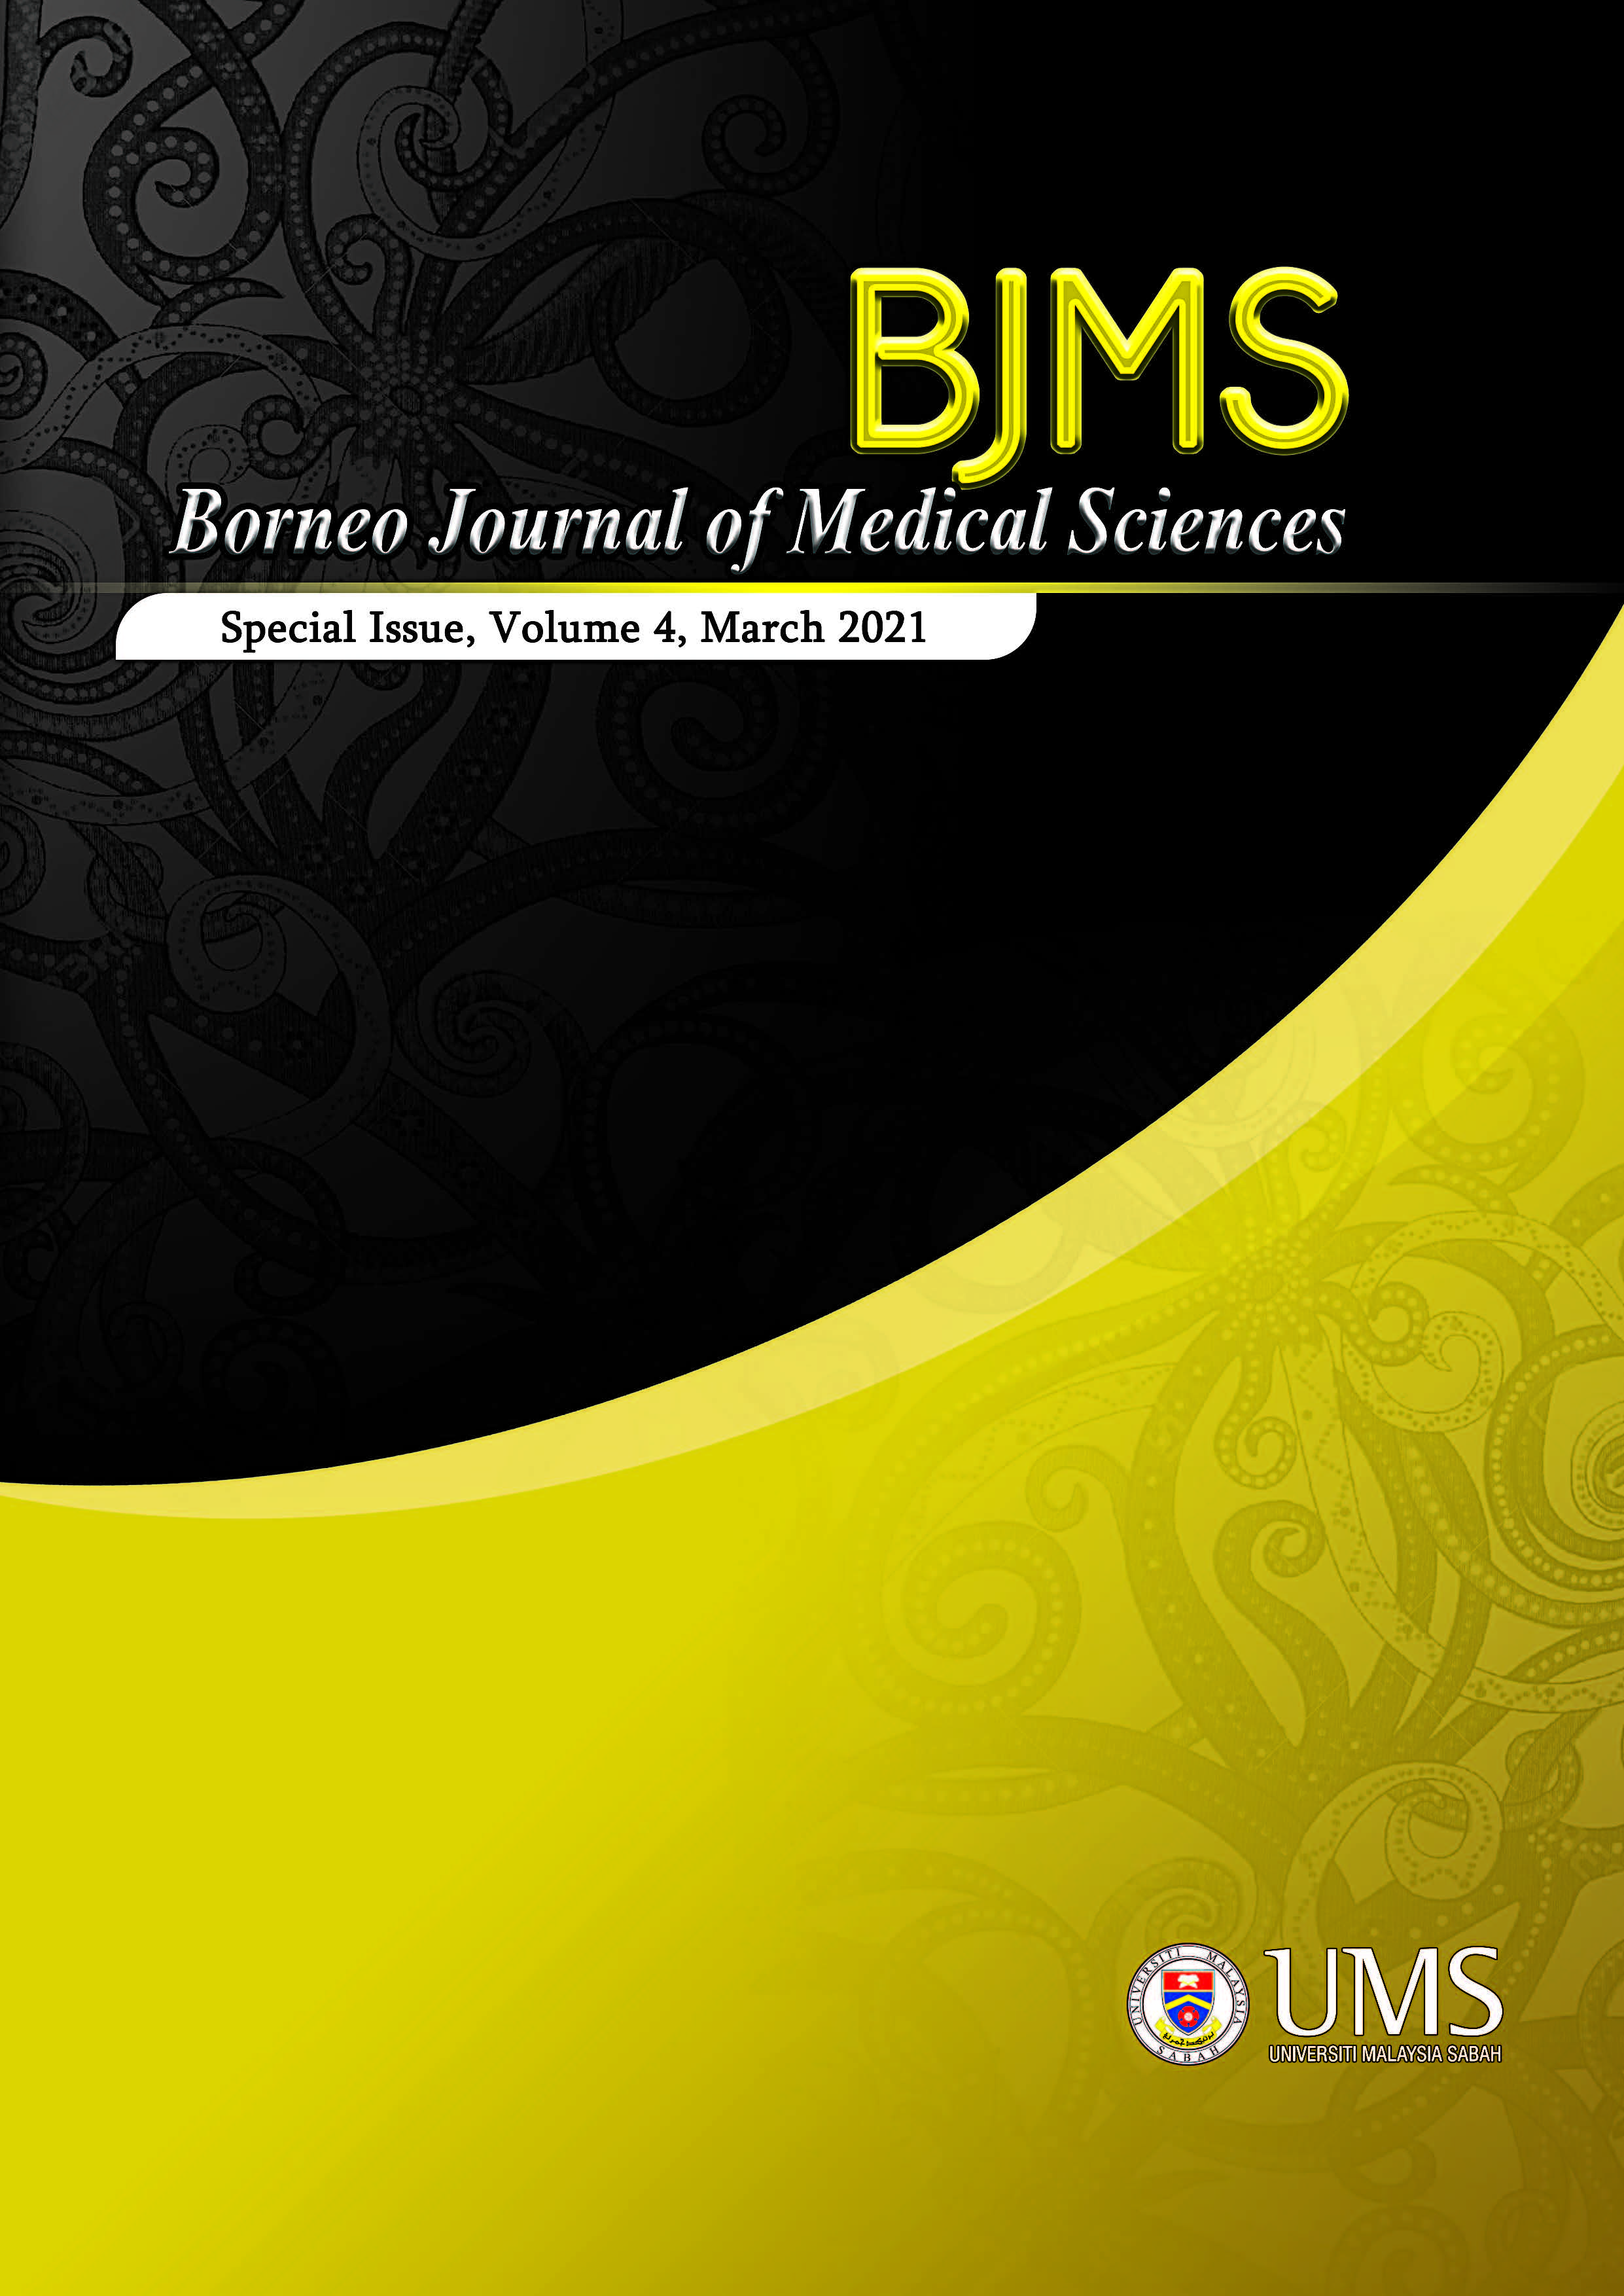 					View Vol. 15 (2021): BORNEO JOURNAL OF MEDICAL SCIENCES (BJMS), VOLUME 15 (Suppl.), MARCH 2021
				